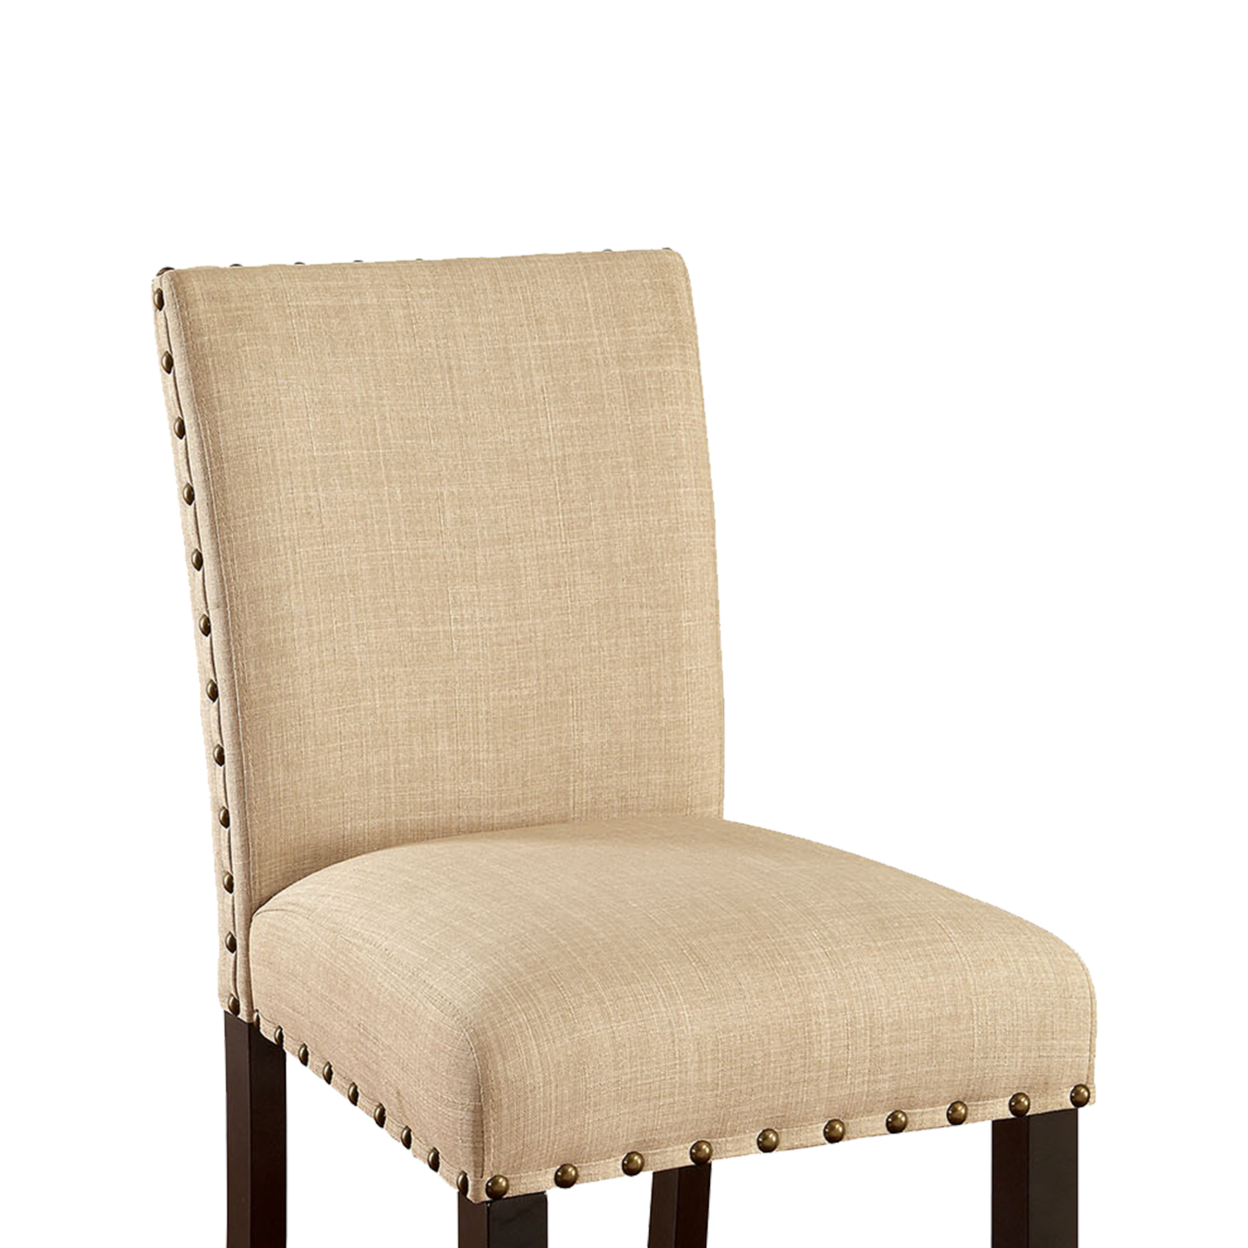 Fabric Upholstered Solid Wood Counter Height Chair With Nail Head Trim, Pack Of Two, Beige And Brown- Saltoro Sherpi